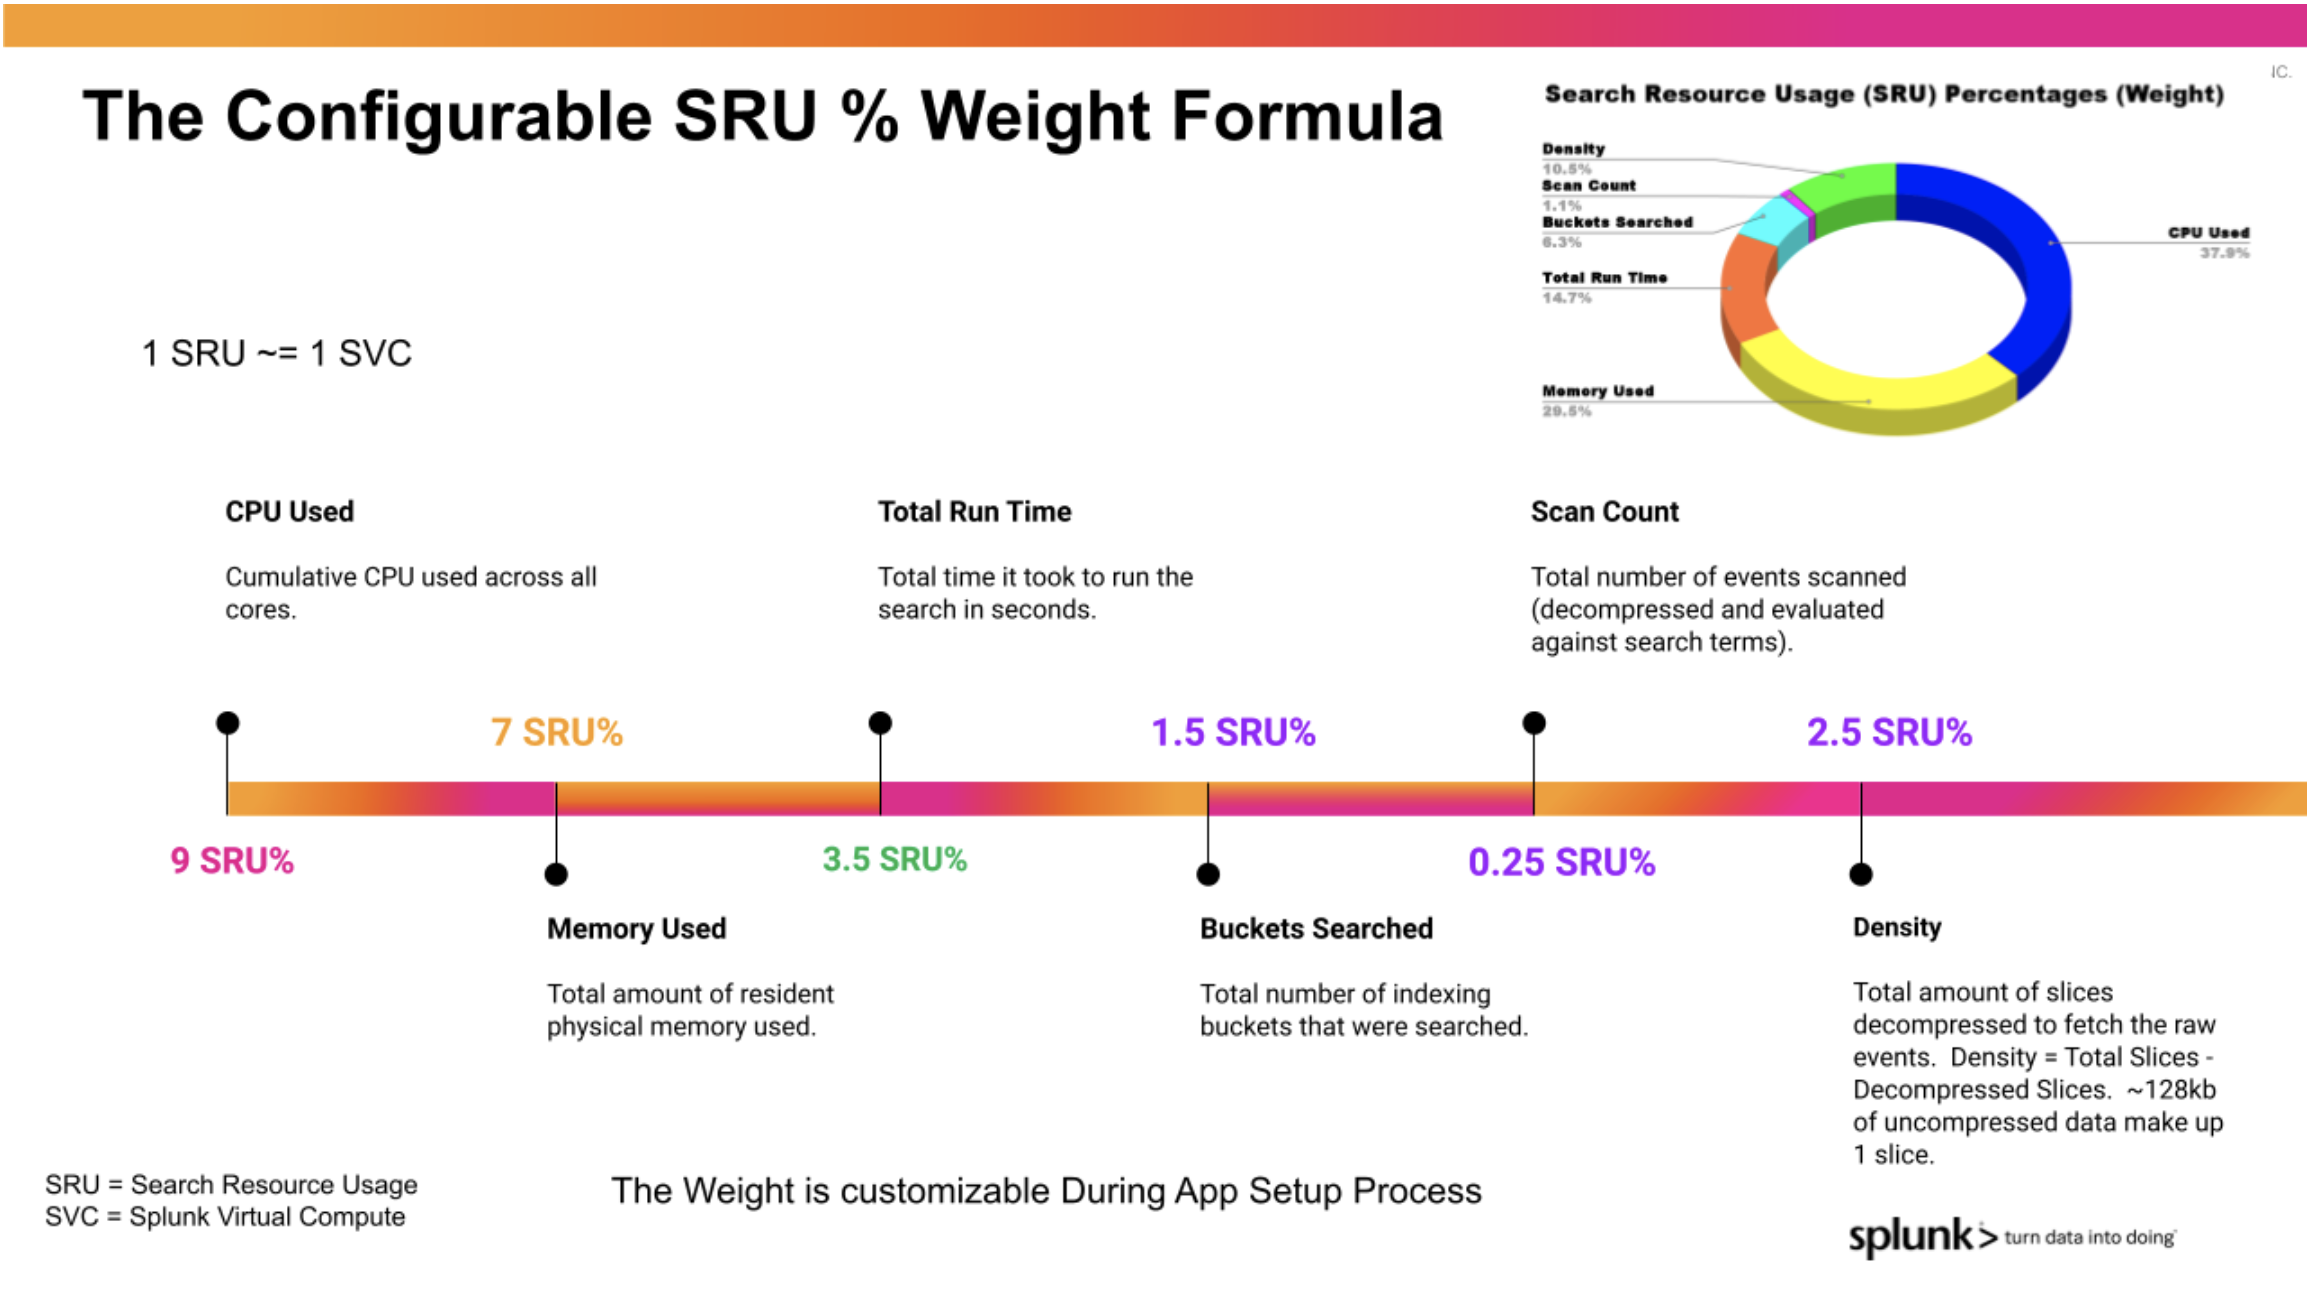 This diagram shows the configurable SRU percentage weight formula